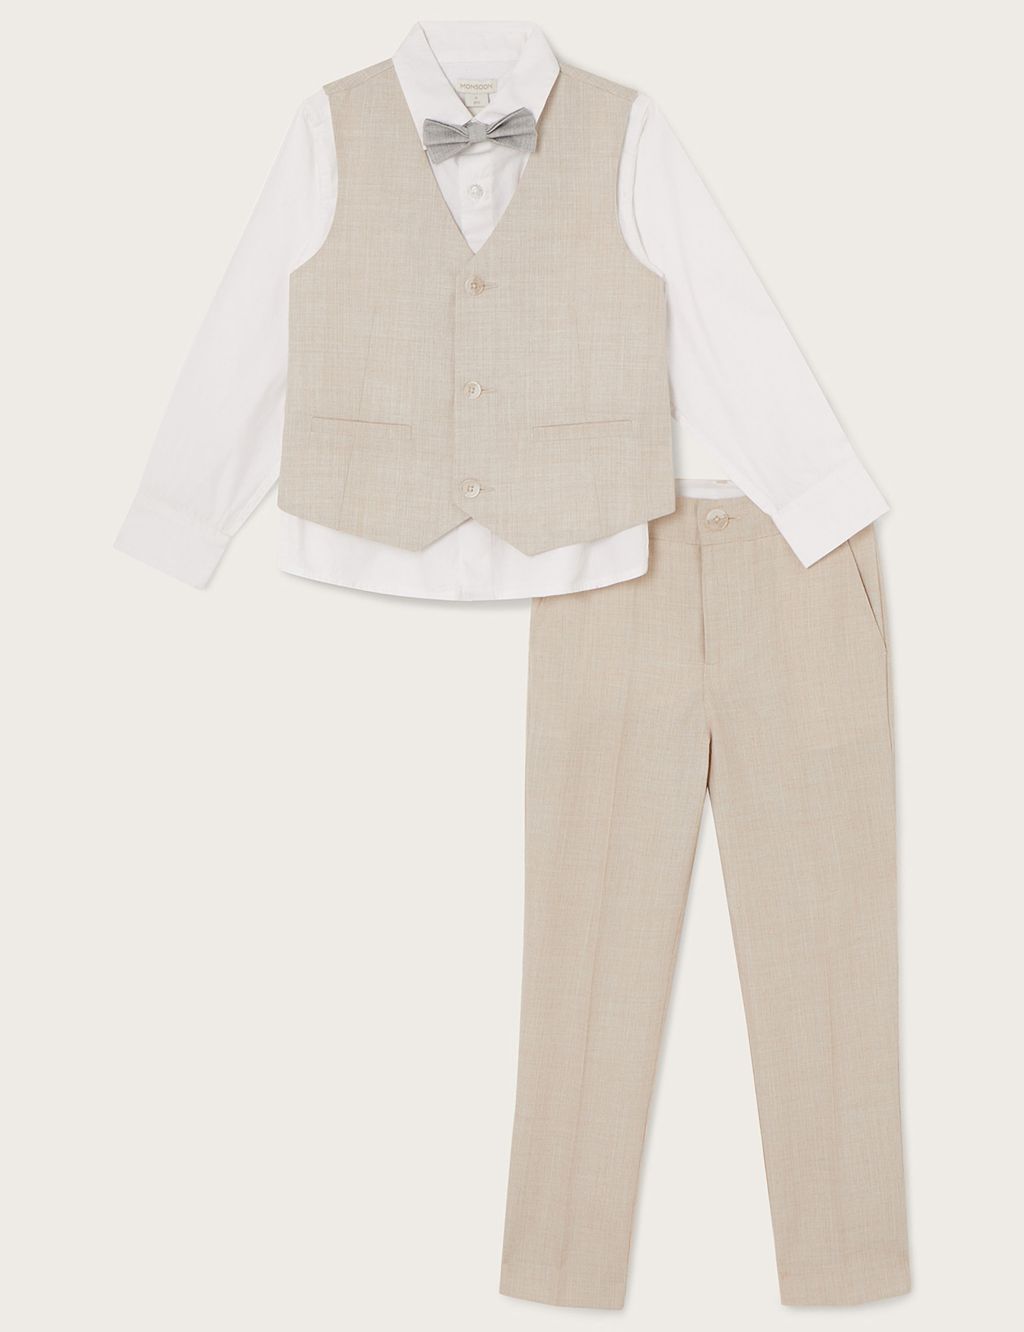 4pc Suit Outfit (6 Mths-15 Yrs) image 1